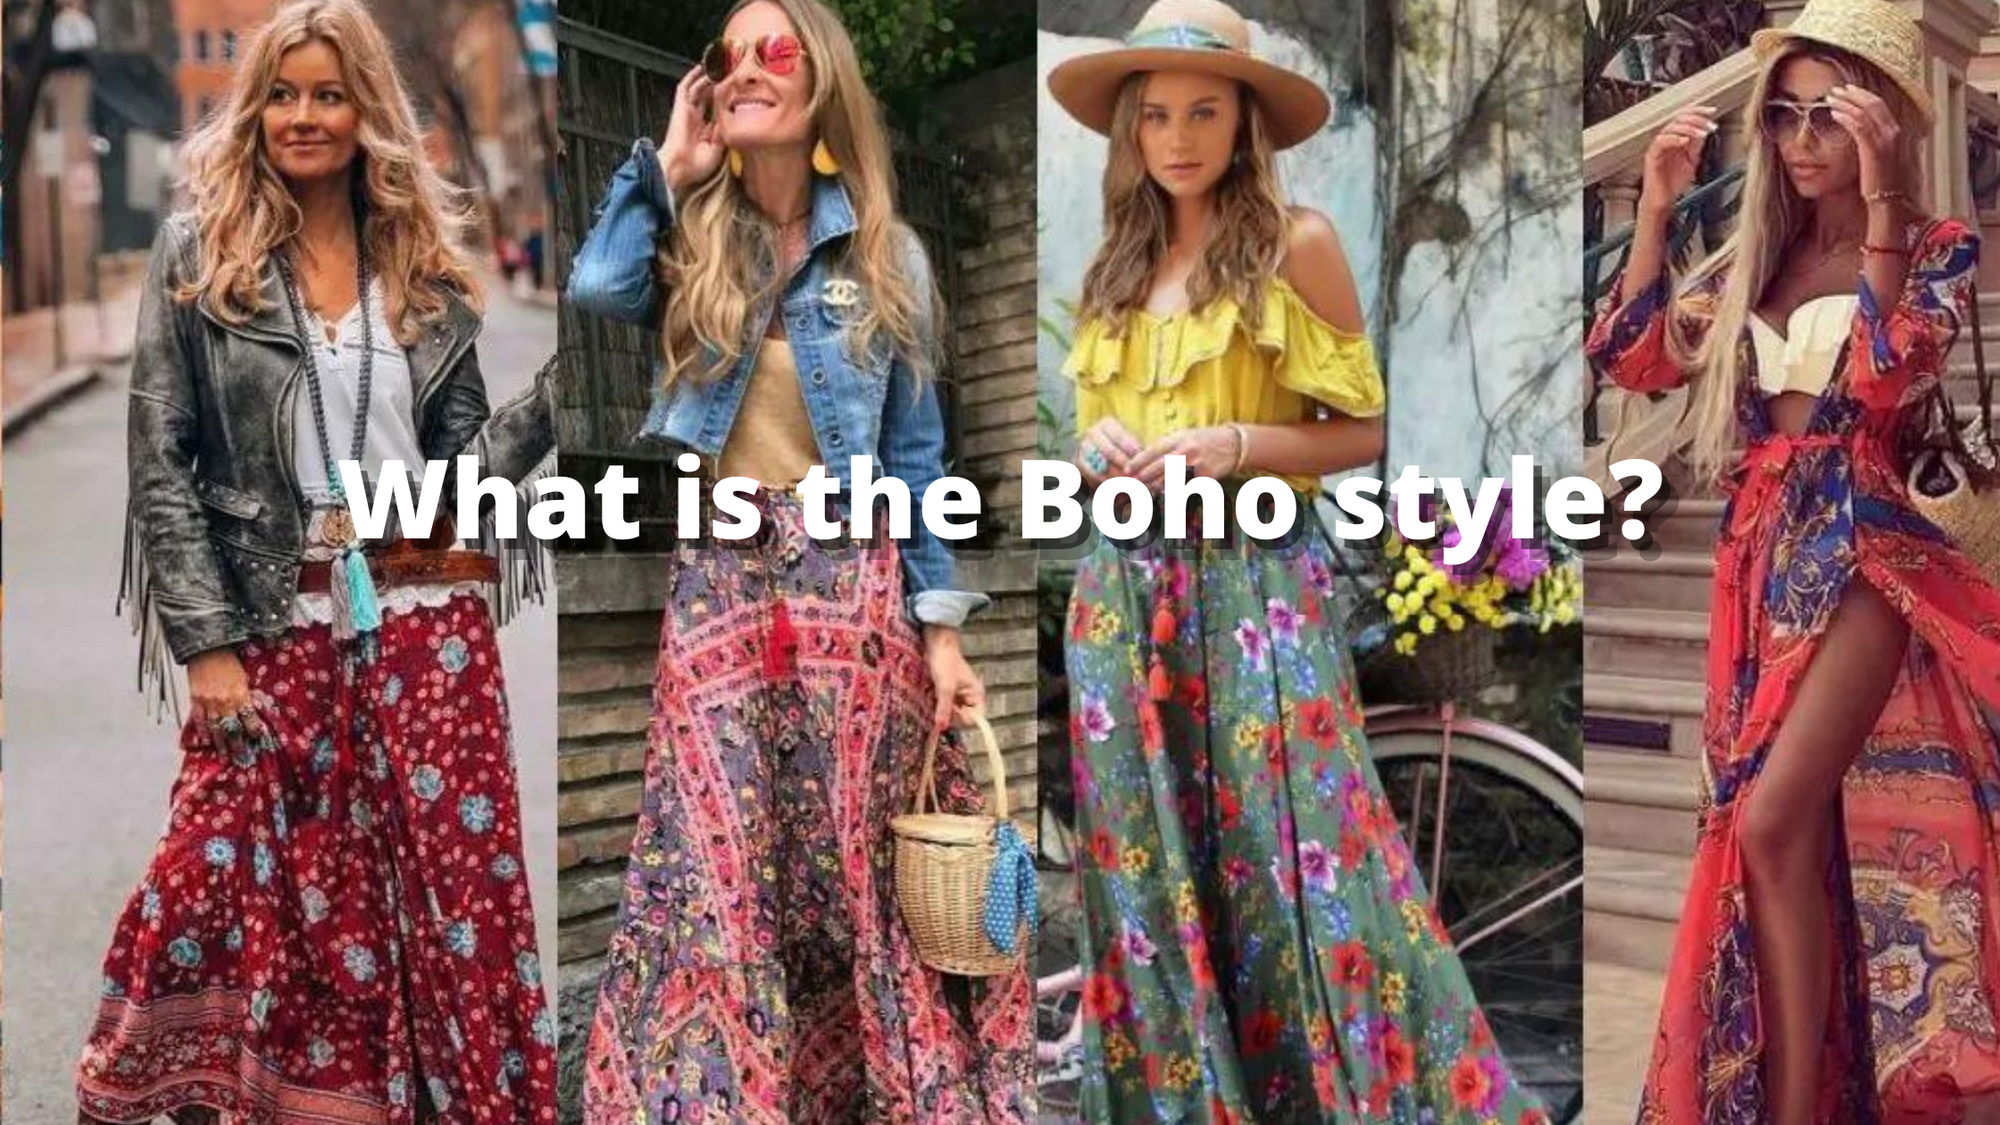 What is the Boho style?